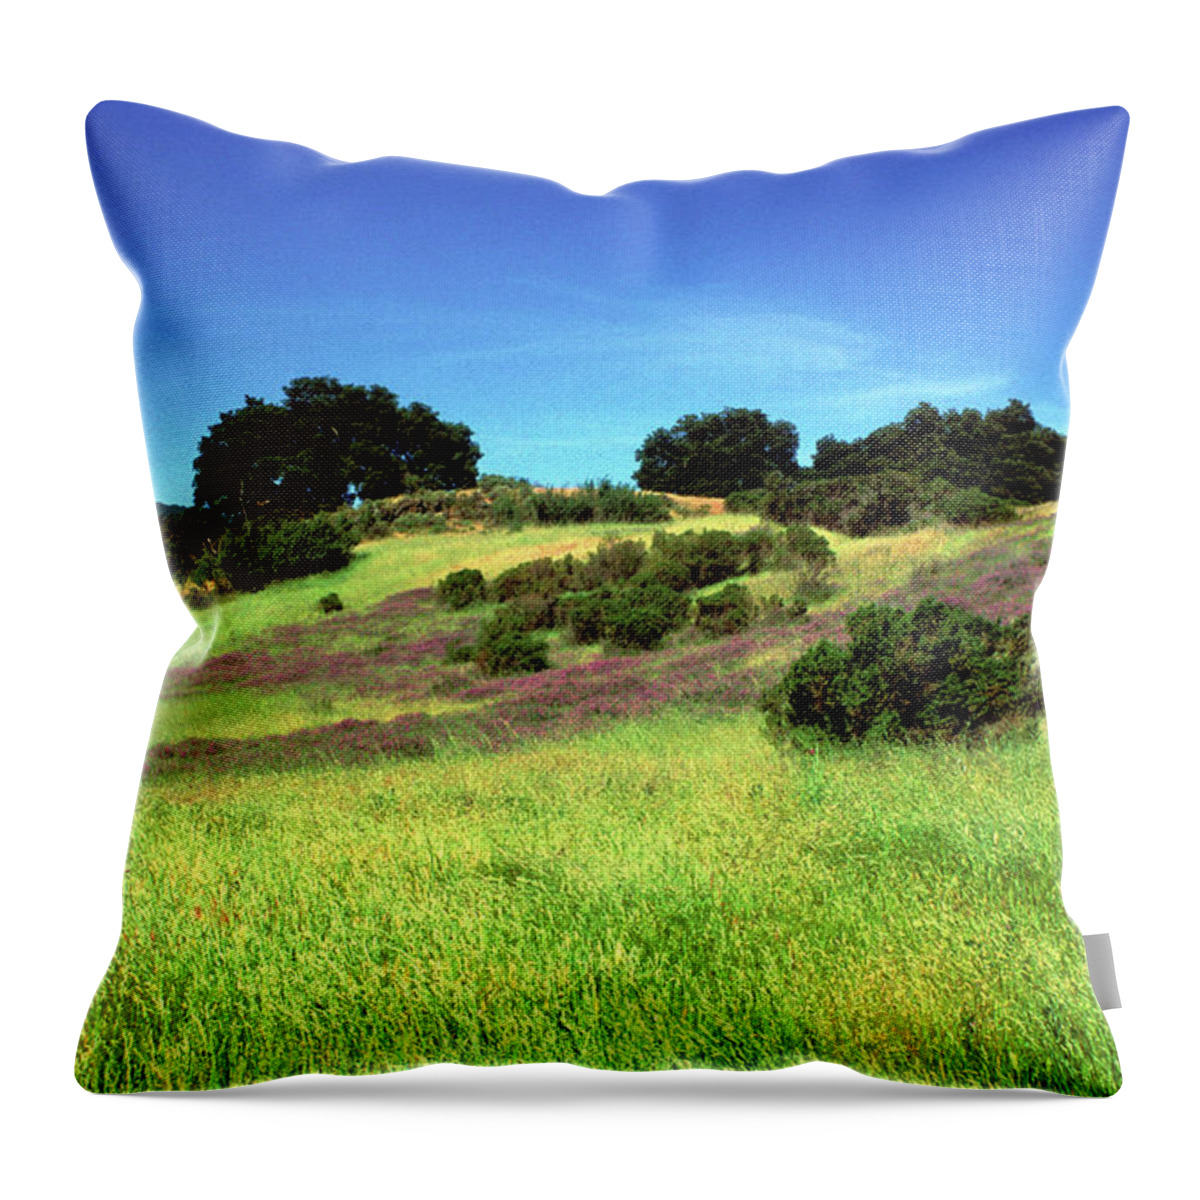 Landscapes Throw Pillow featuring the photograph Splendor in the Grass by Kathy Yates